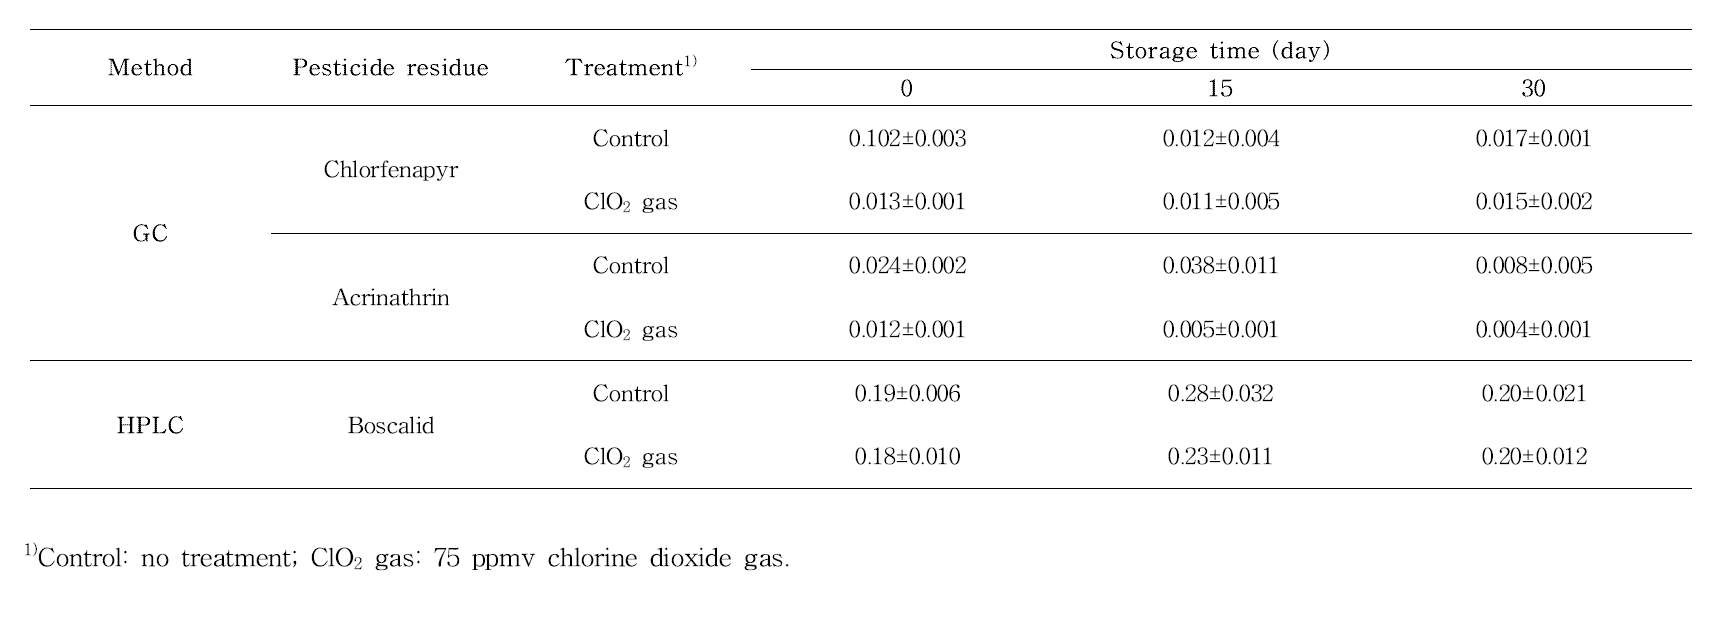 The effect of chlorine dioxide gas on reducing pesticide residue in paprika during storage